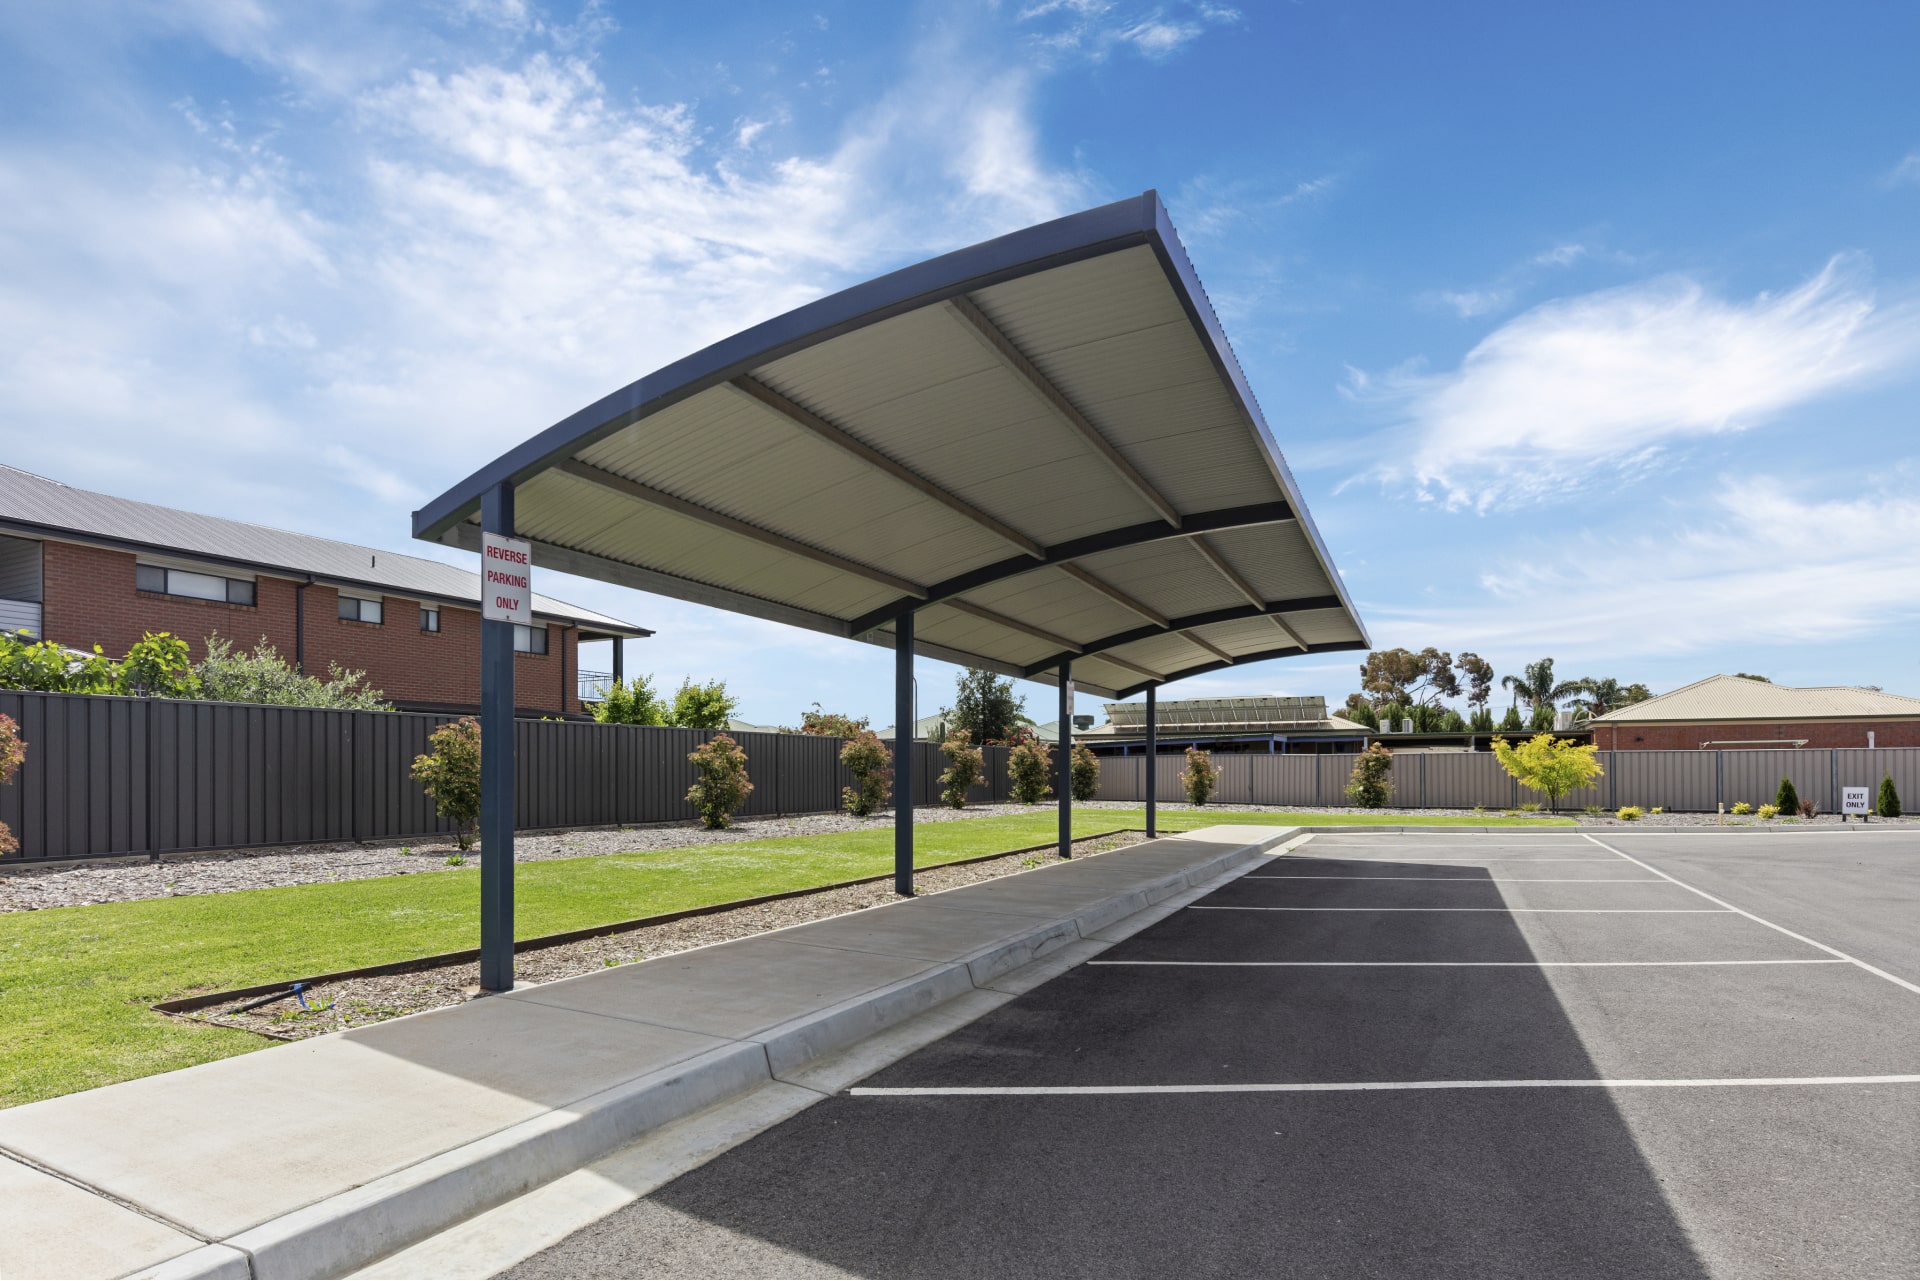 Steel Cantilever Bus Shelter Shade Cover